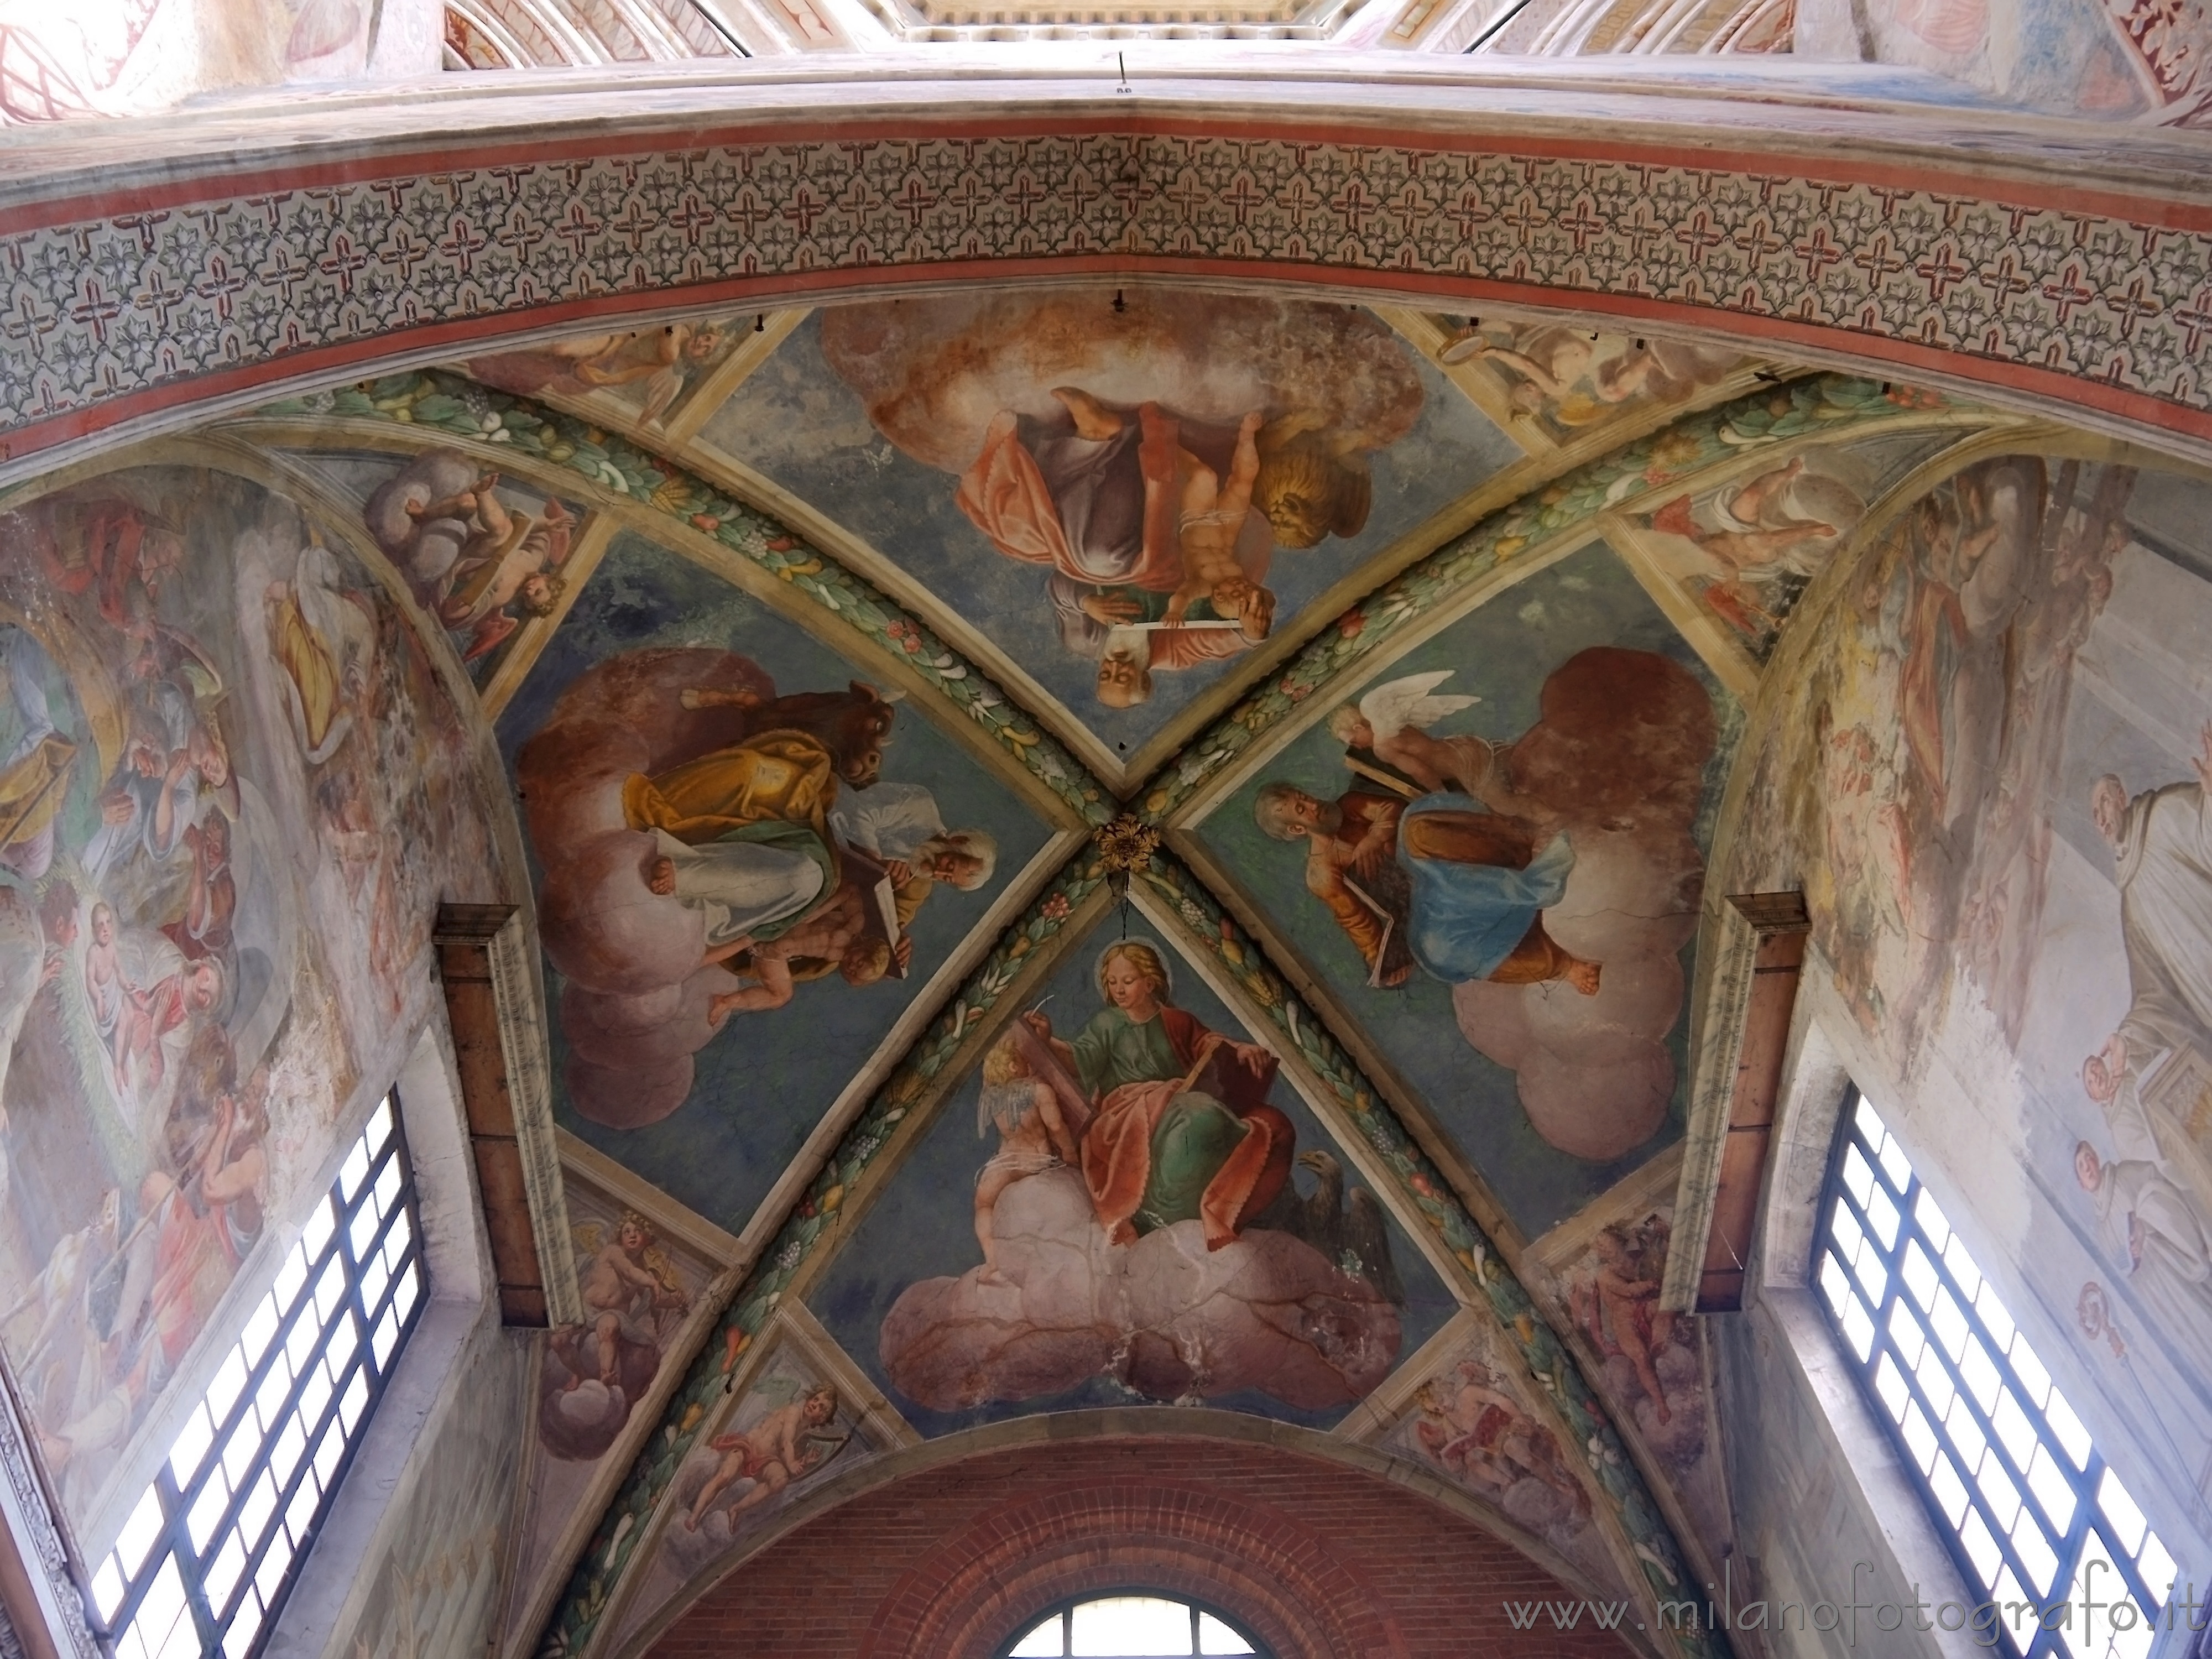 Milan (Italy): Frescos on the voult of the aps of the Abbey of Chiaravalle - Milan (Italy)